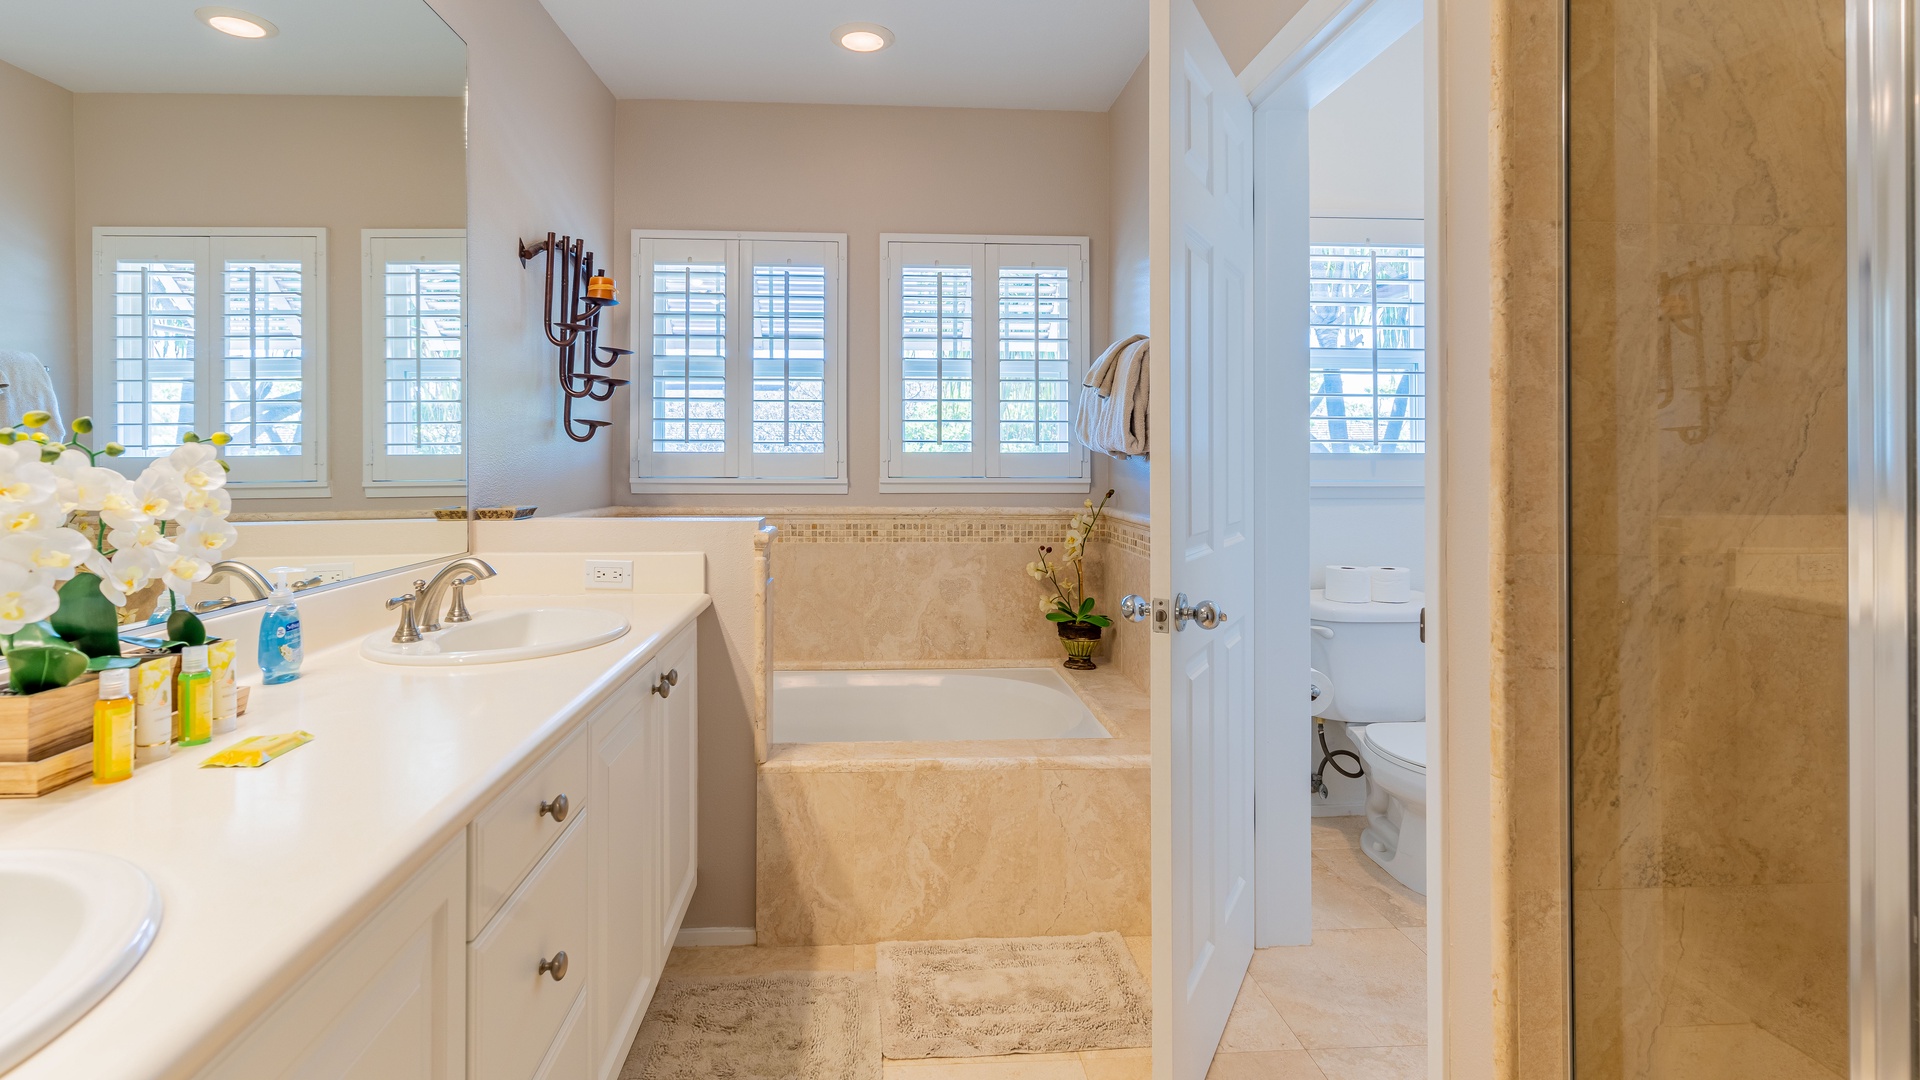 Kapolei Vacation Rentals, Coconut Plantation 1074-1 - The primary guest bathroom with a luxurious tub for soaking.